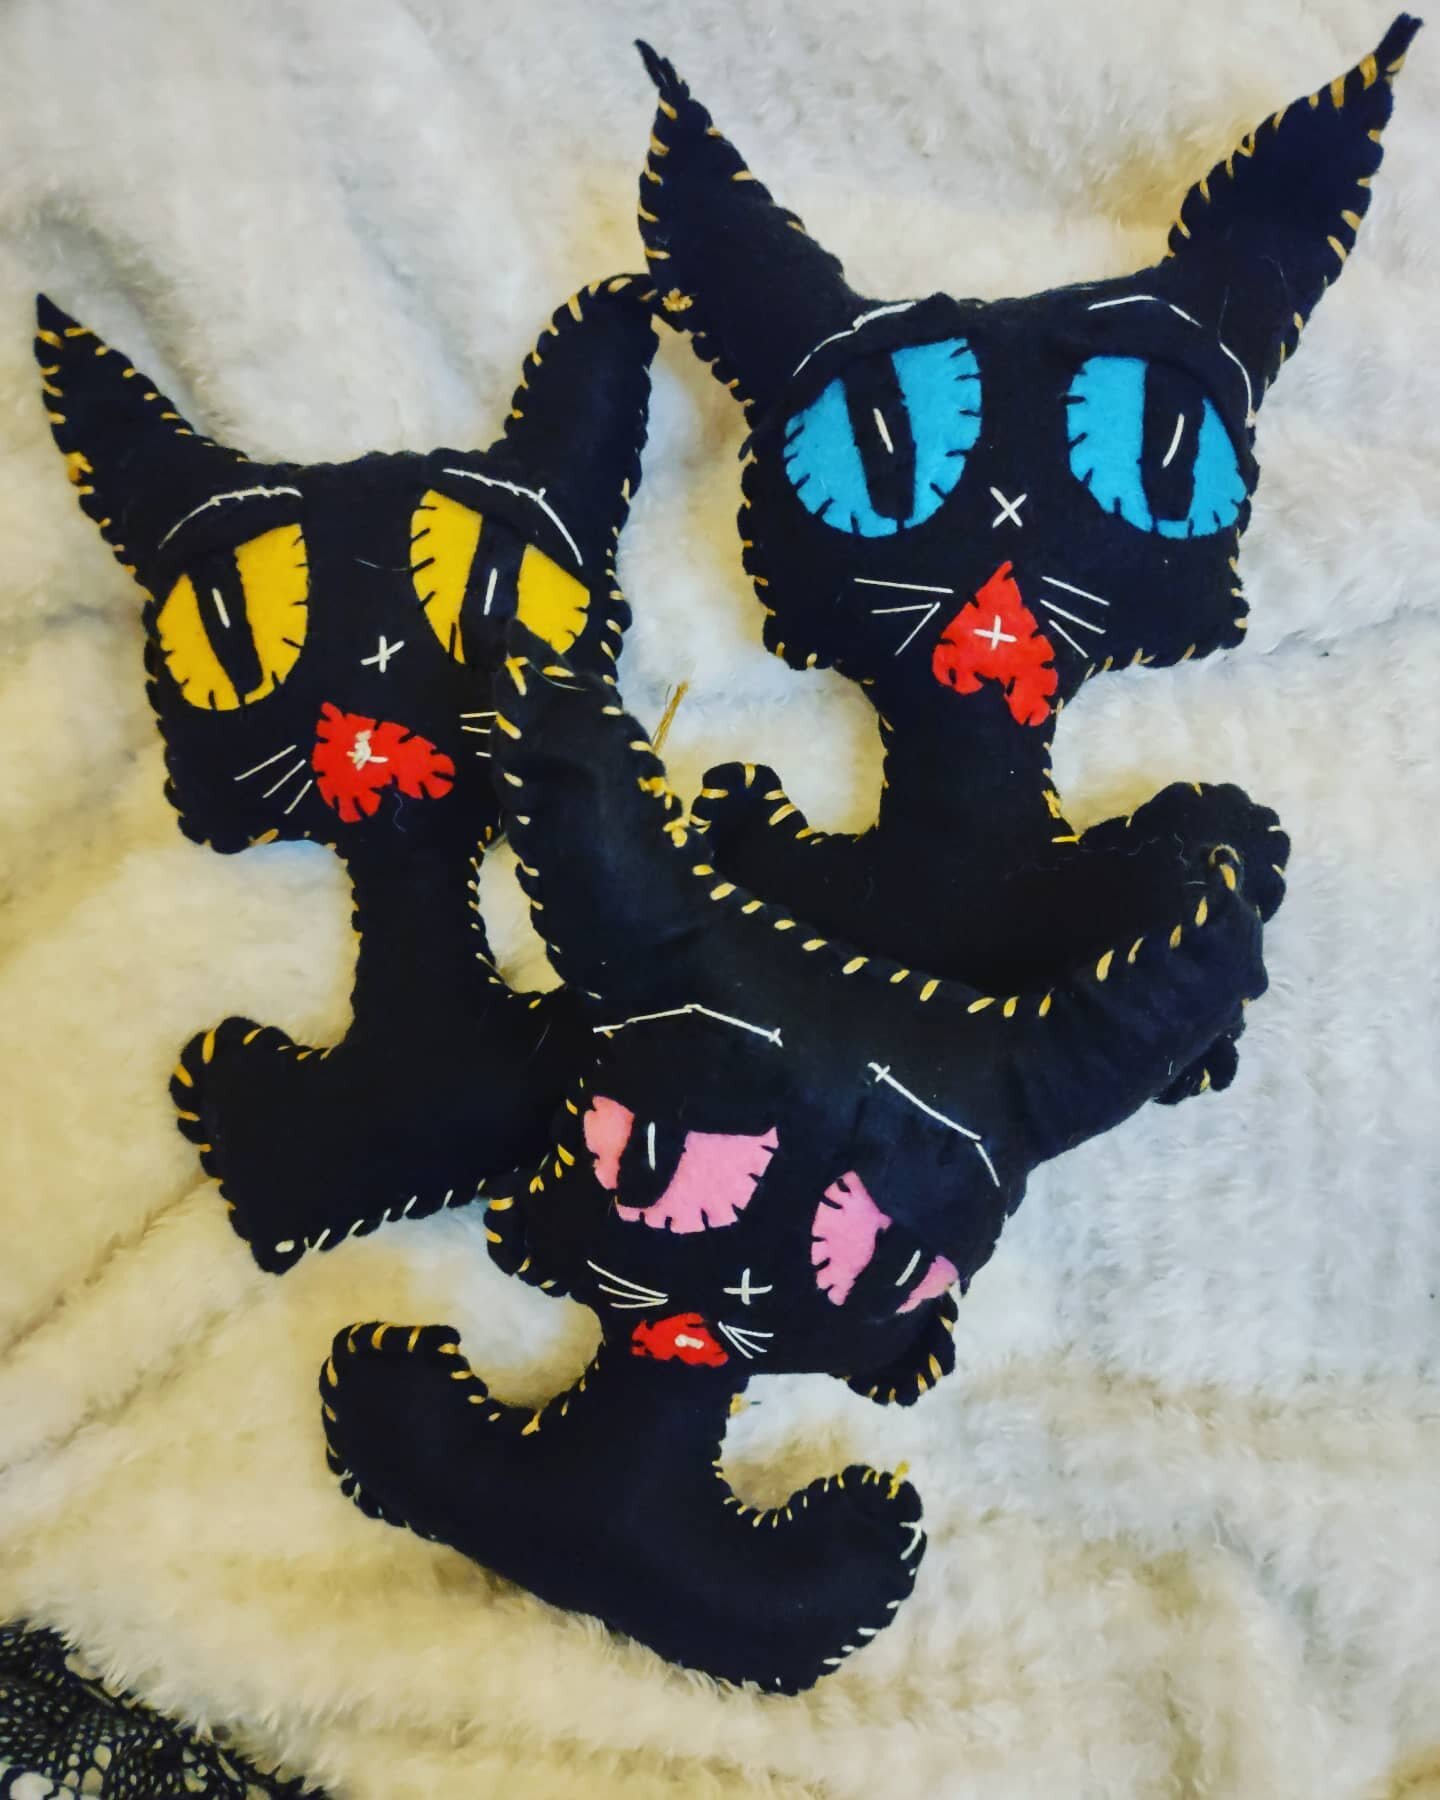 This lil crossroad Trinity are ready for their forever homes!
Next the Kitchen Witches!
Leaps and Bounds
#blackcat 
#handstitched 
#frankimcense 
#kookteflondolls